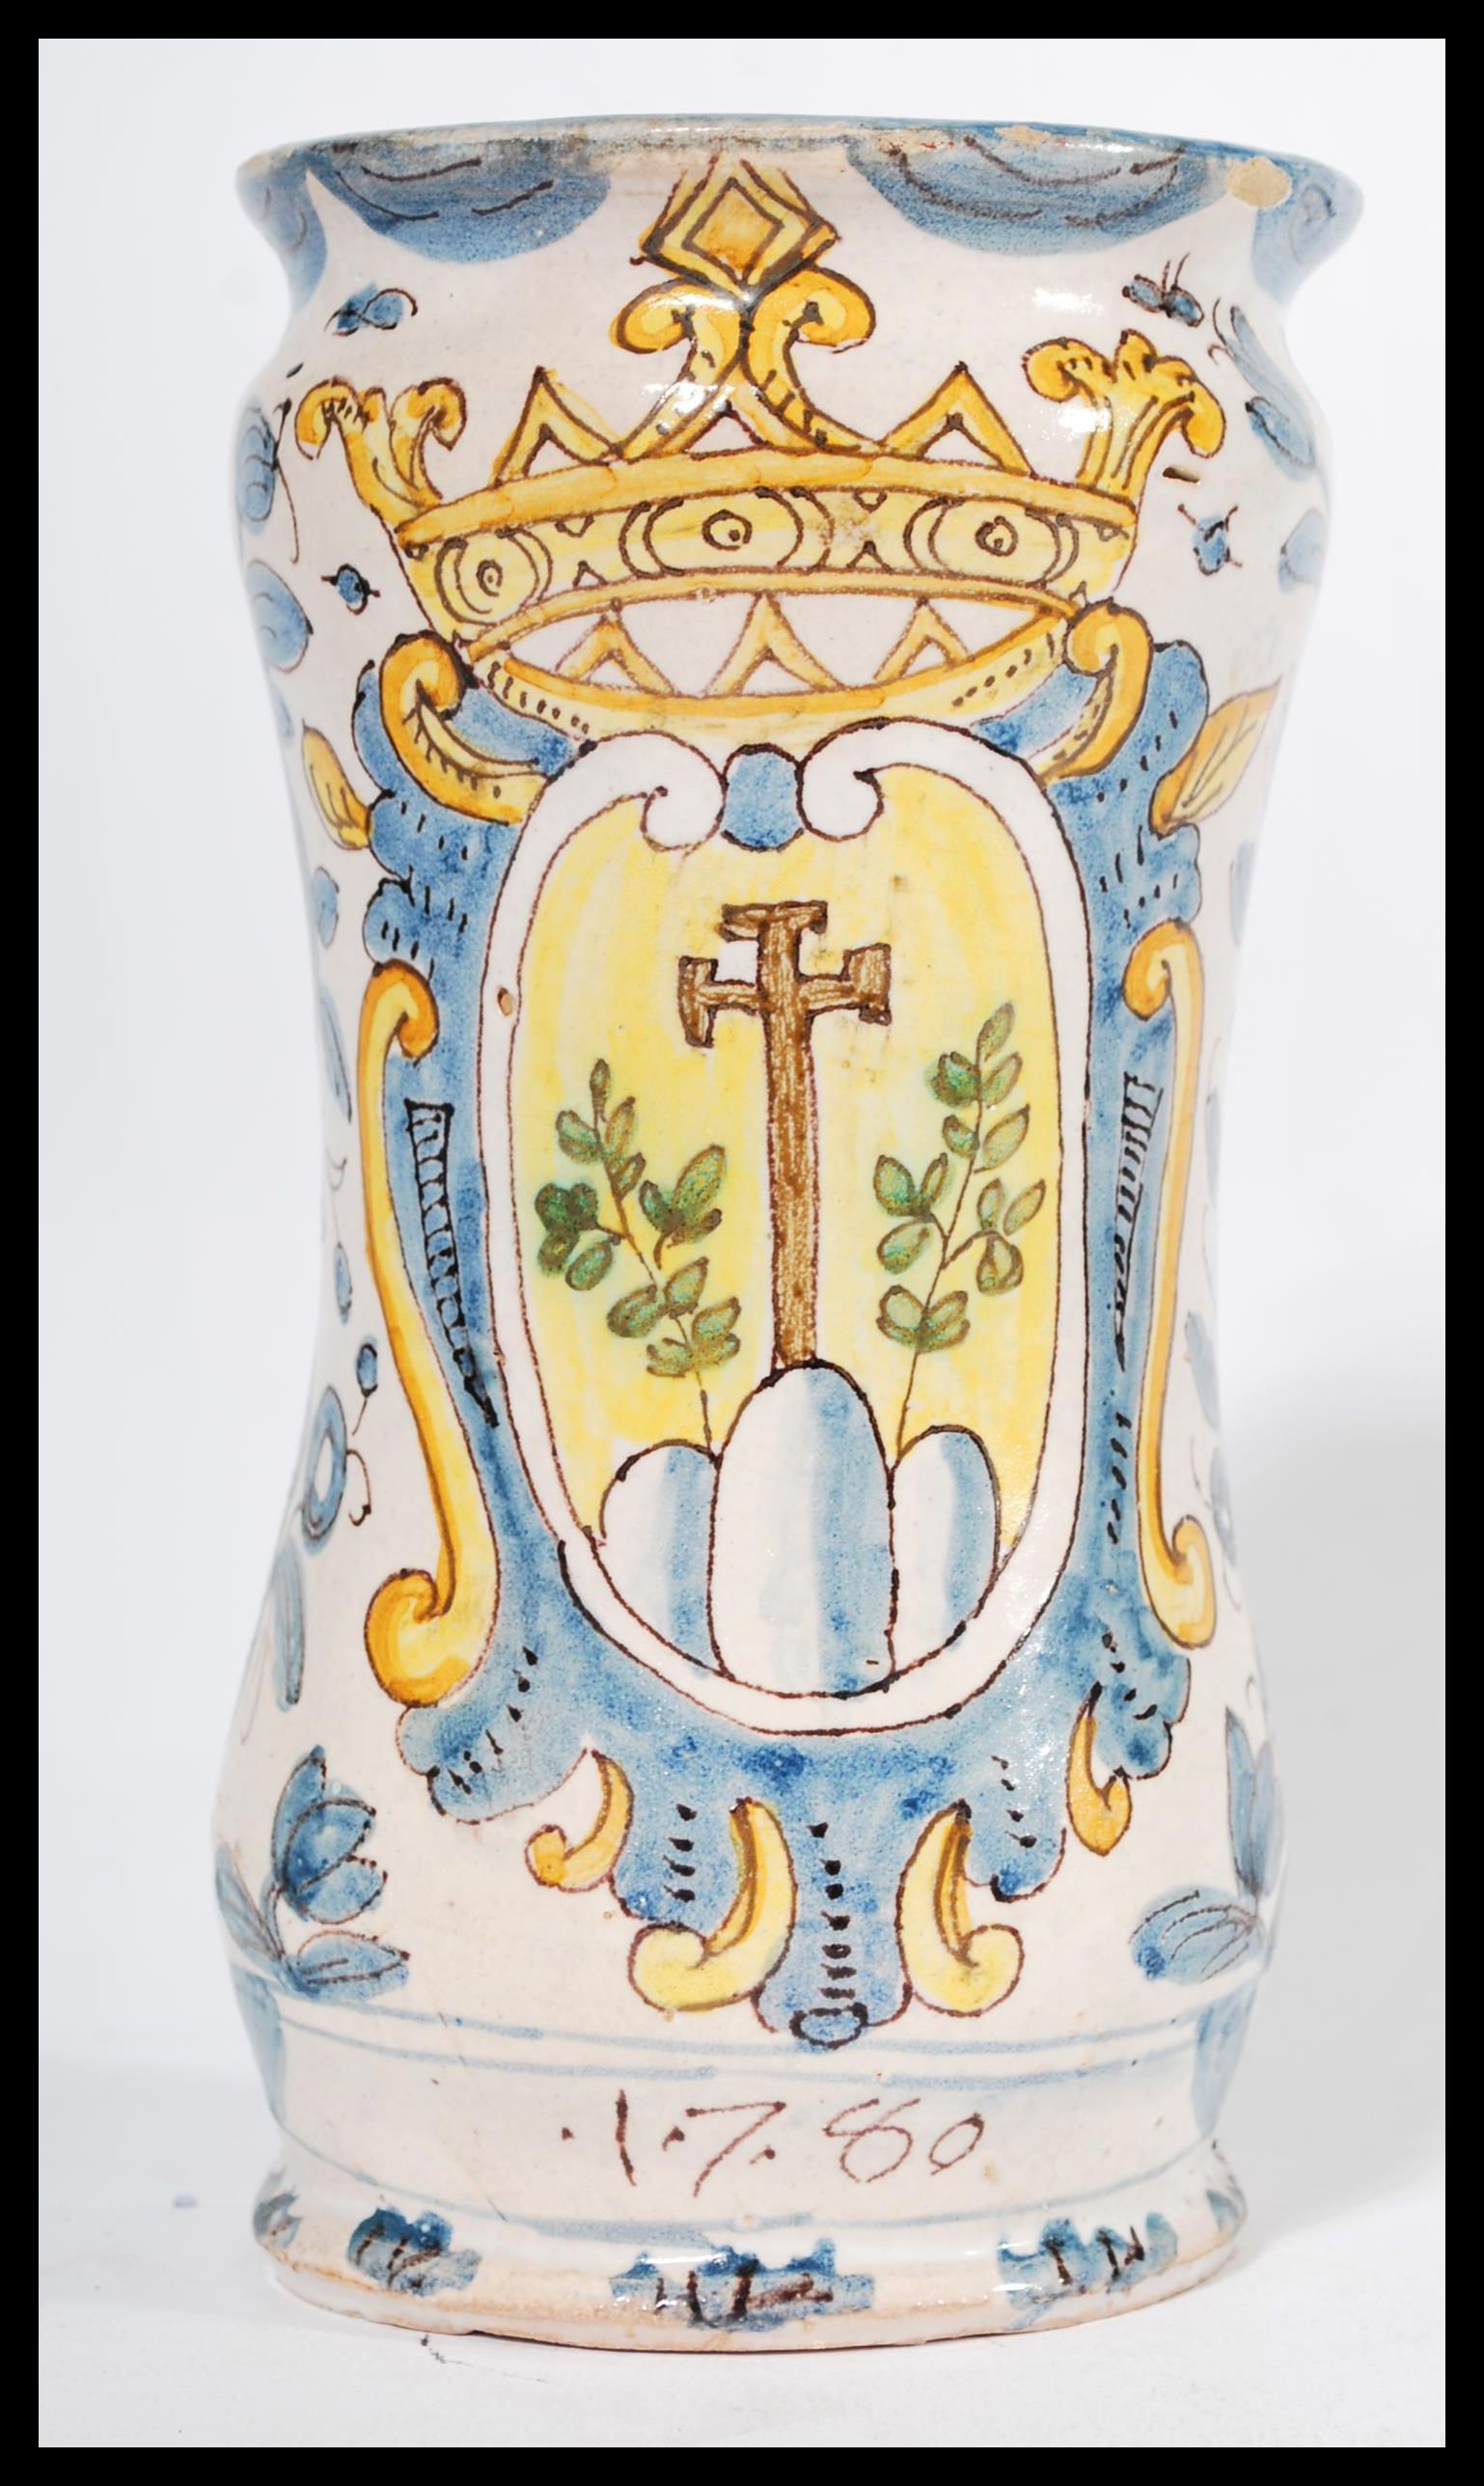 A believed 18th century French / Italian faience majolica polychrome vase dated 1780 with central